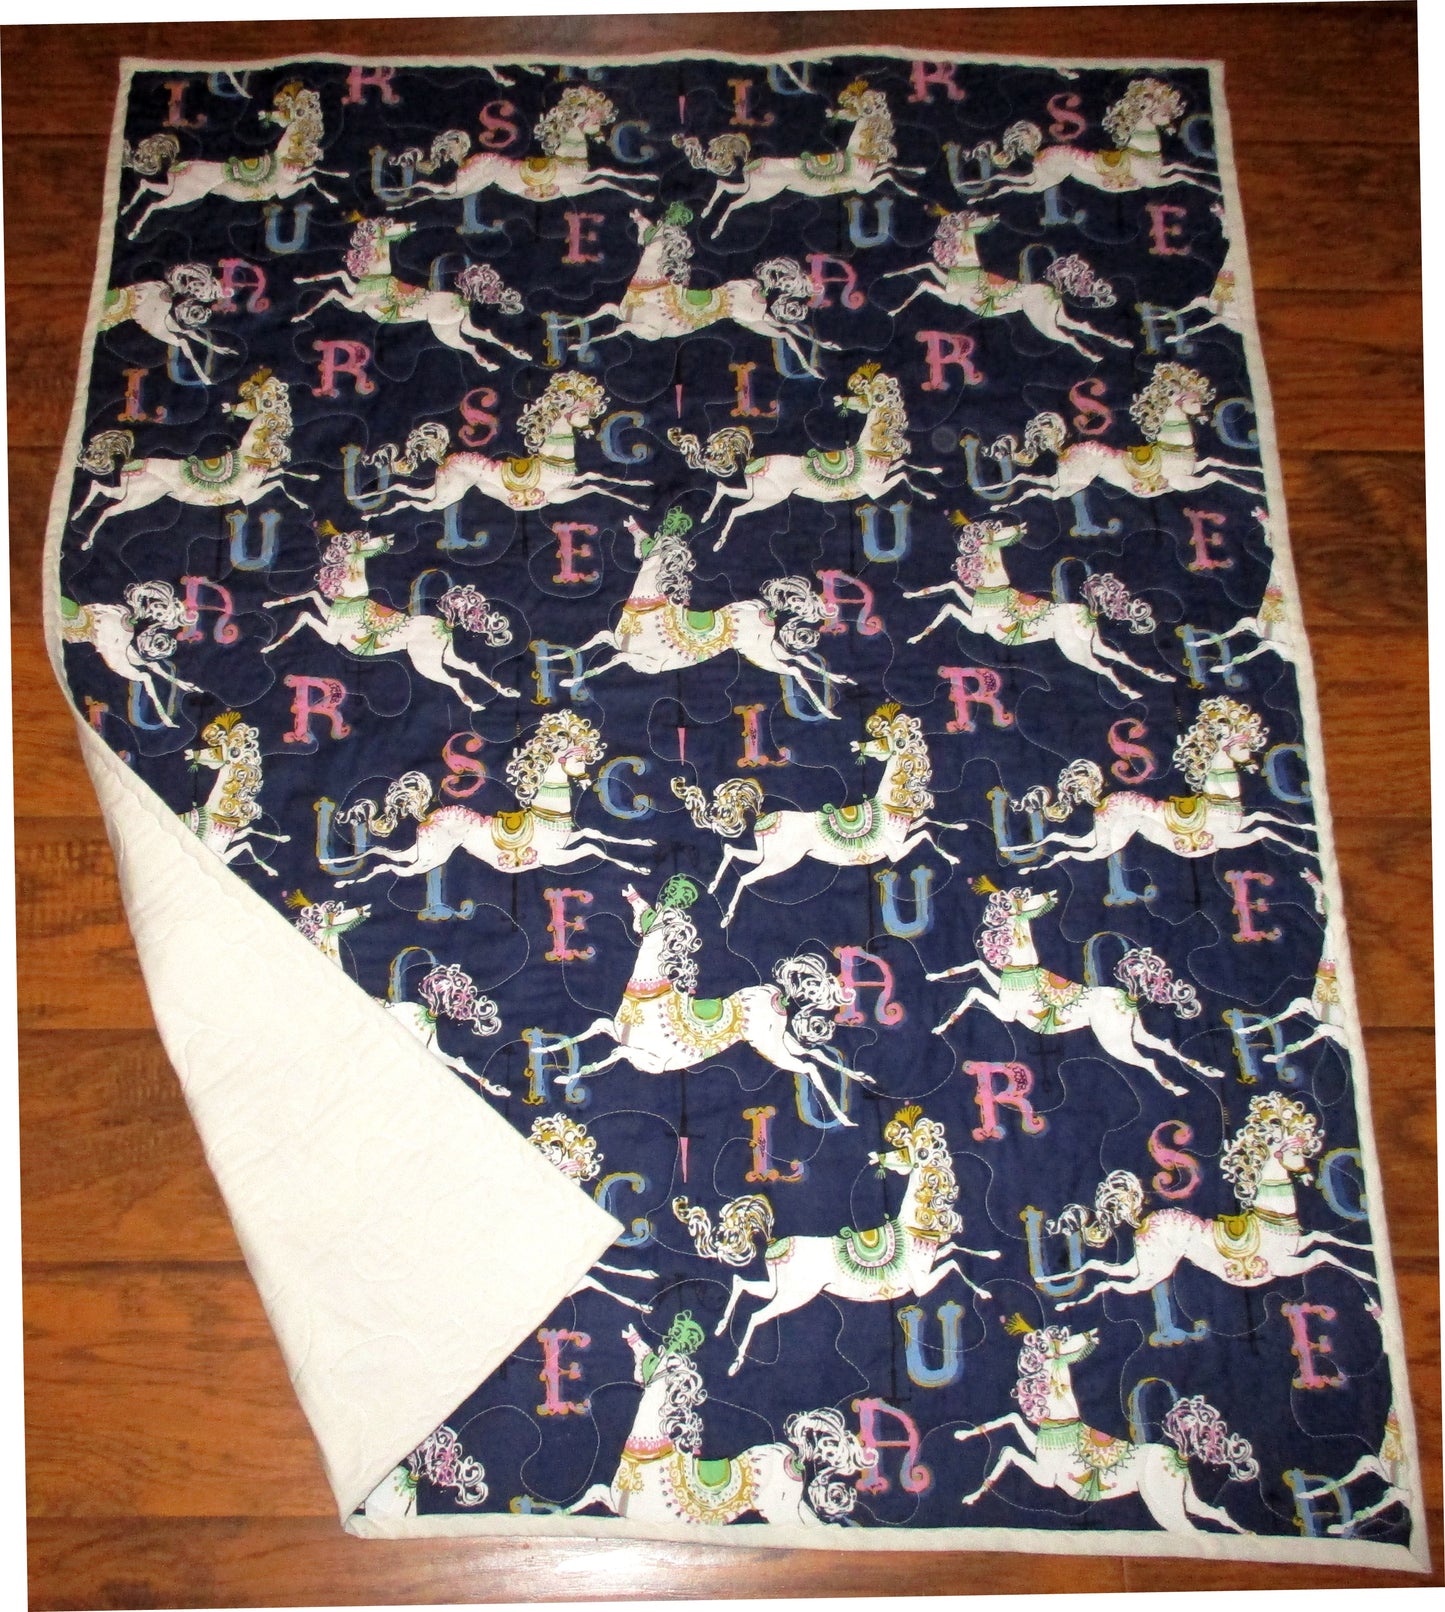 CAROUSEL WHITE HORSES Quilted Blanket